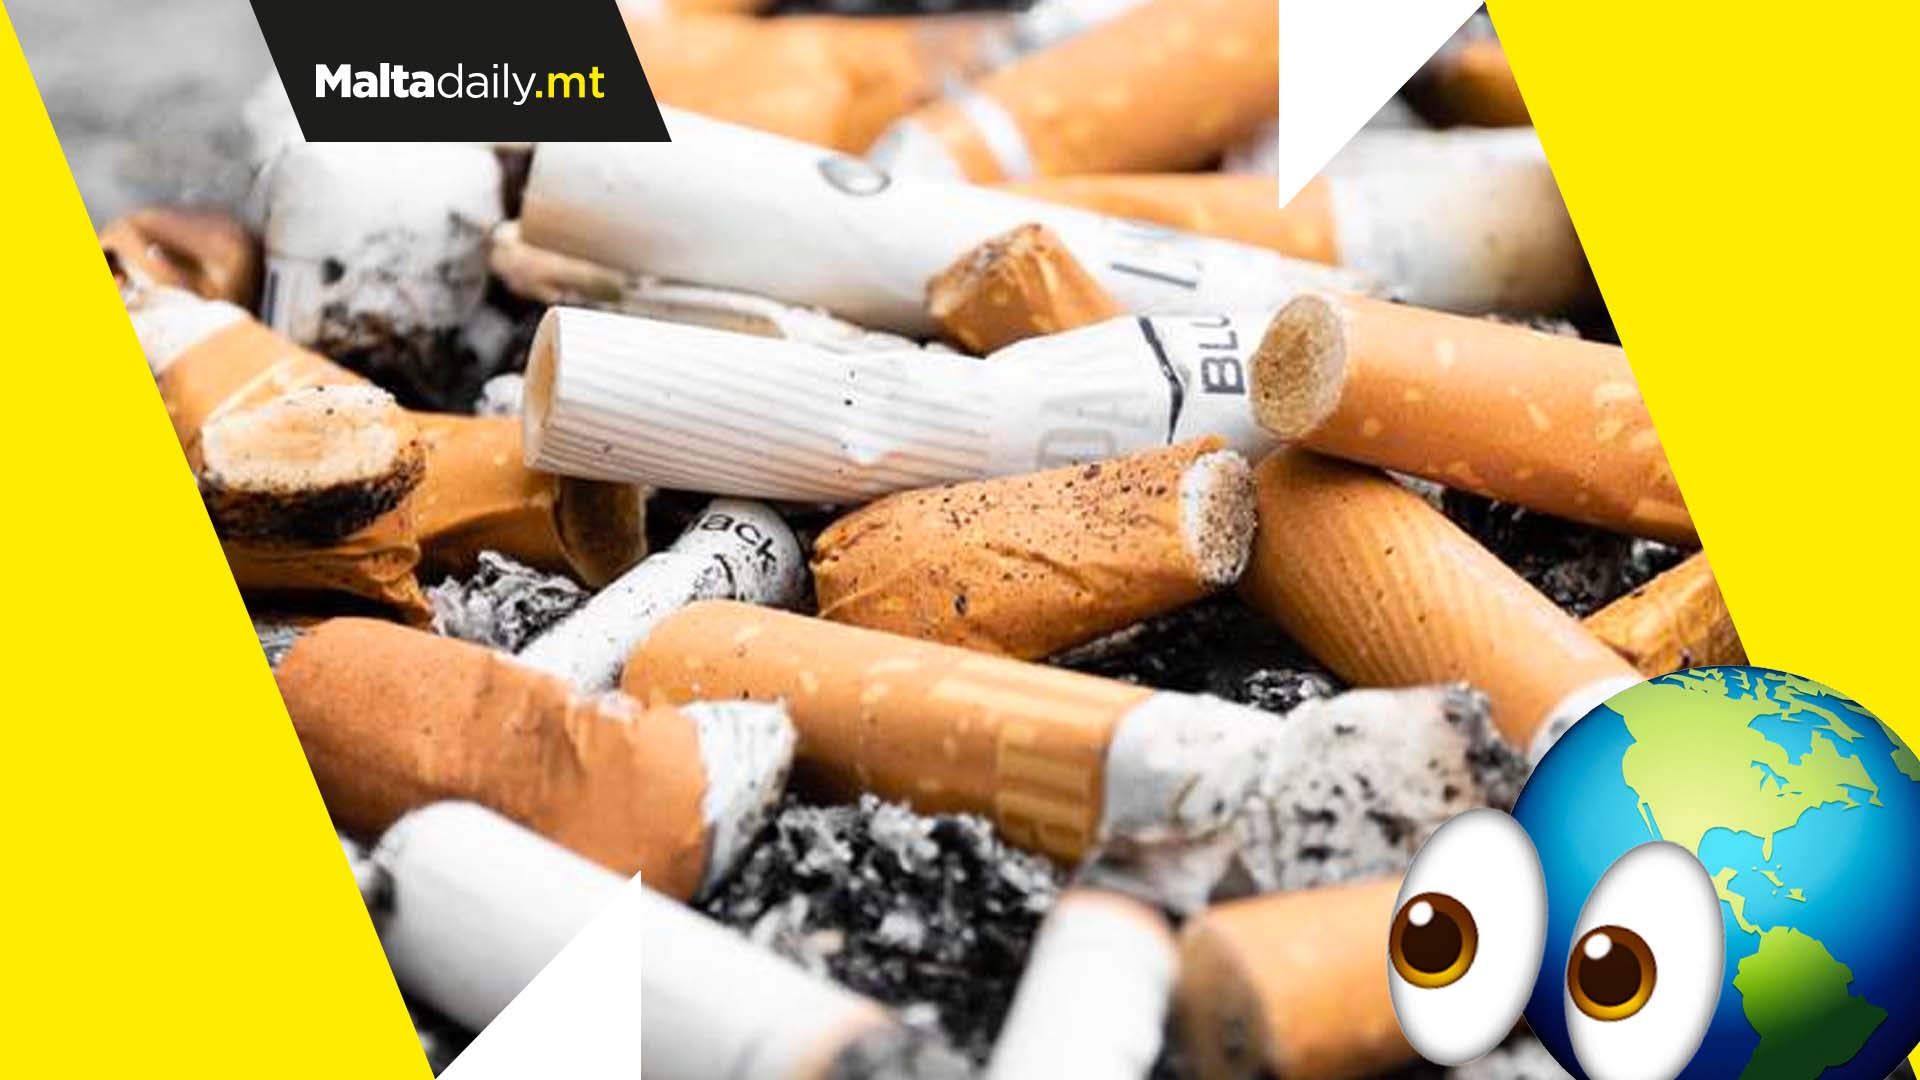 4.5 trillion cigarette filters pollute the world’s environments each year